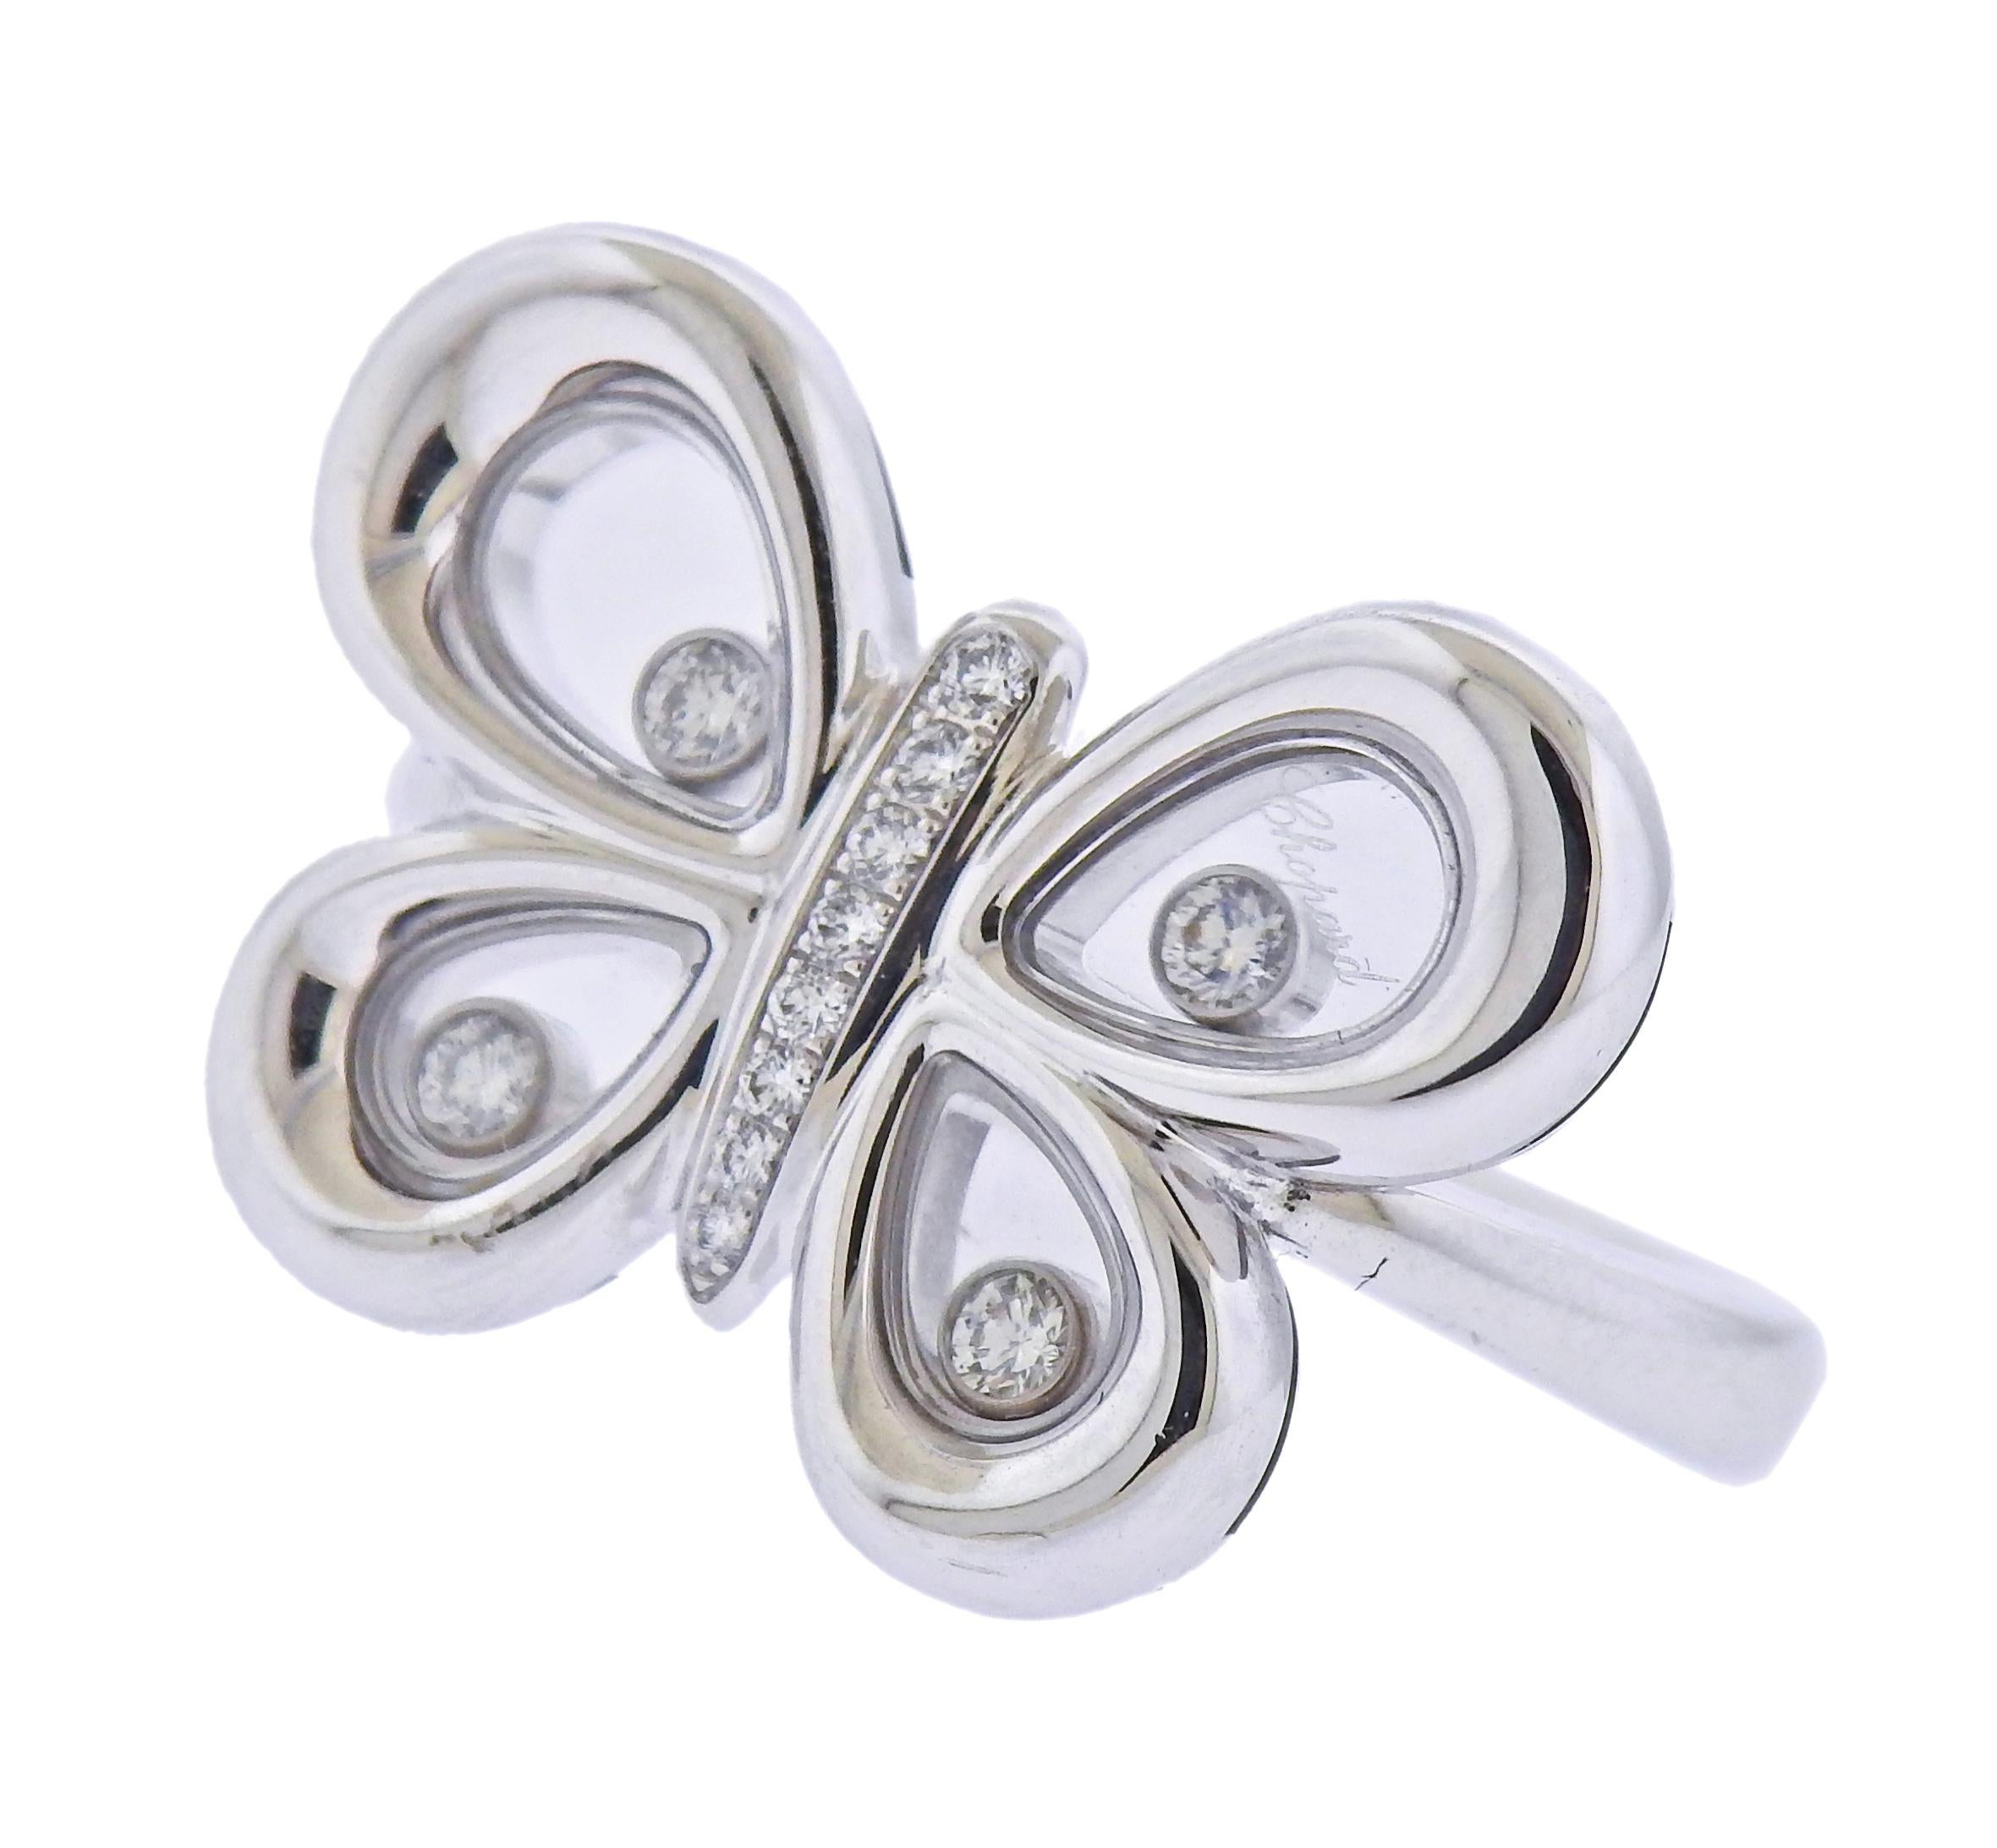 New 18k white gold Happy Butterflies ring by Chopard, with approx. 0.12ctw in GH/VVS diamonds.  Retail $6500, with box and papers.  Ring size - 6, ring top is 17mm x 22mm. Marked: Chopard, 750, 829511-1210, 6362654. Weight - 11 grams. 